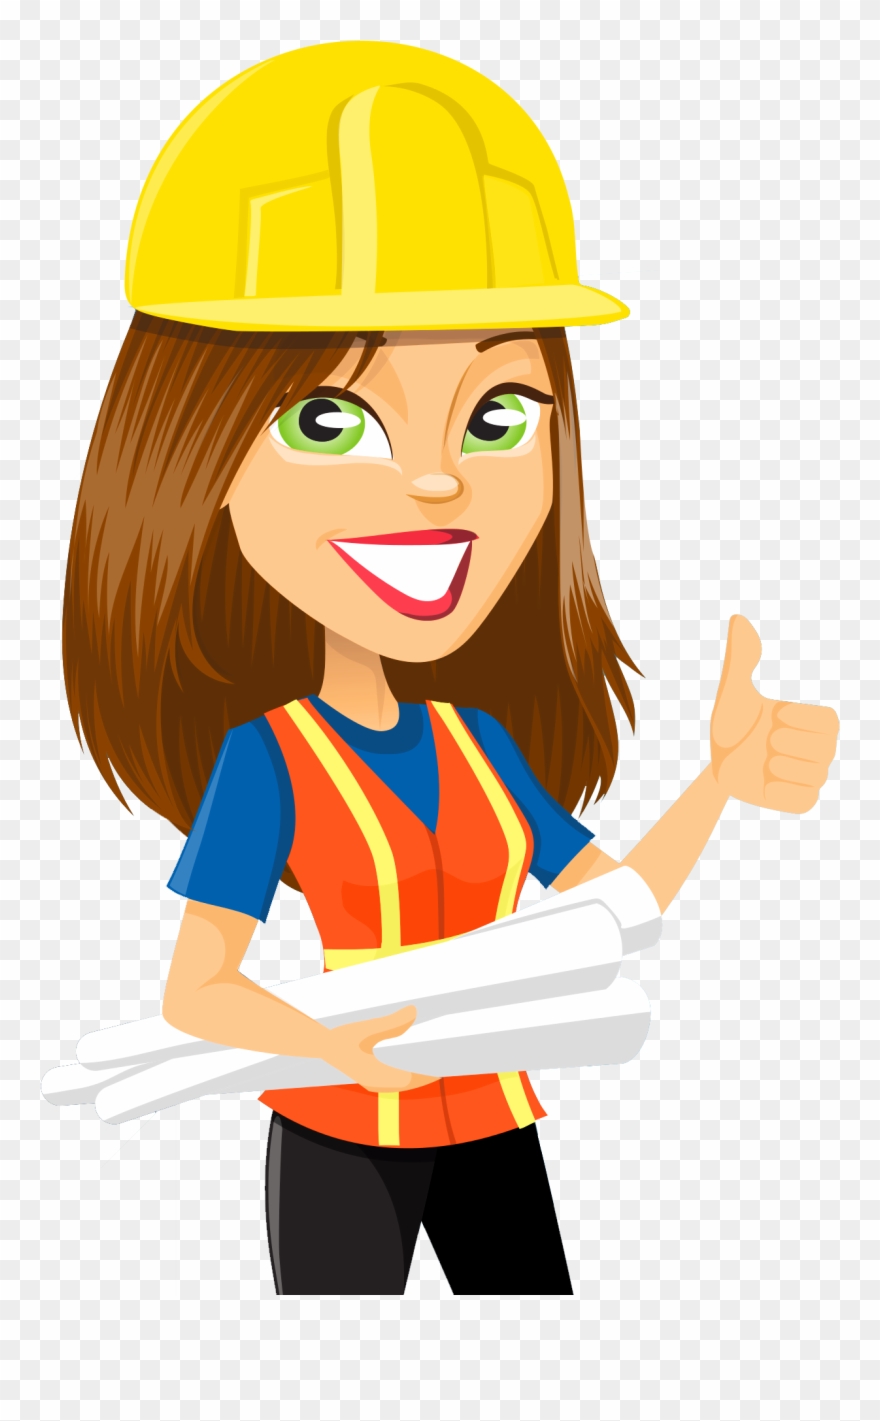  collection of transparent. Engineering clipart woman engineer